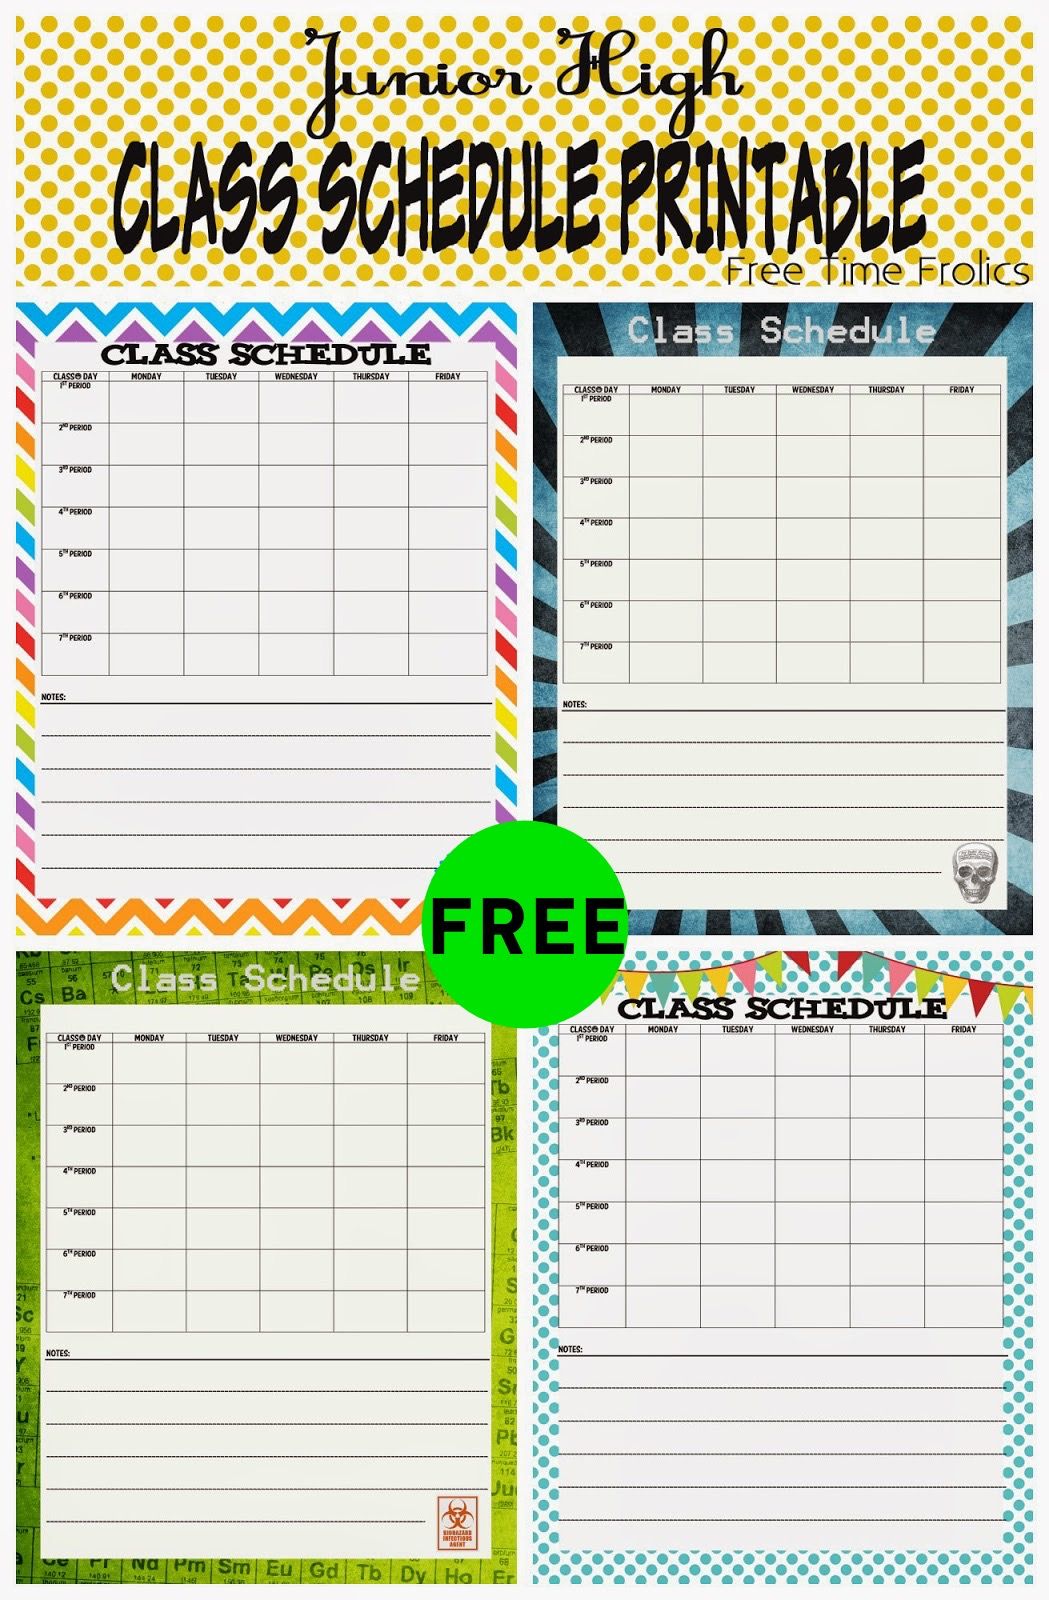 FREE Class Schedule Printable!